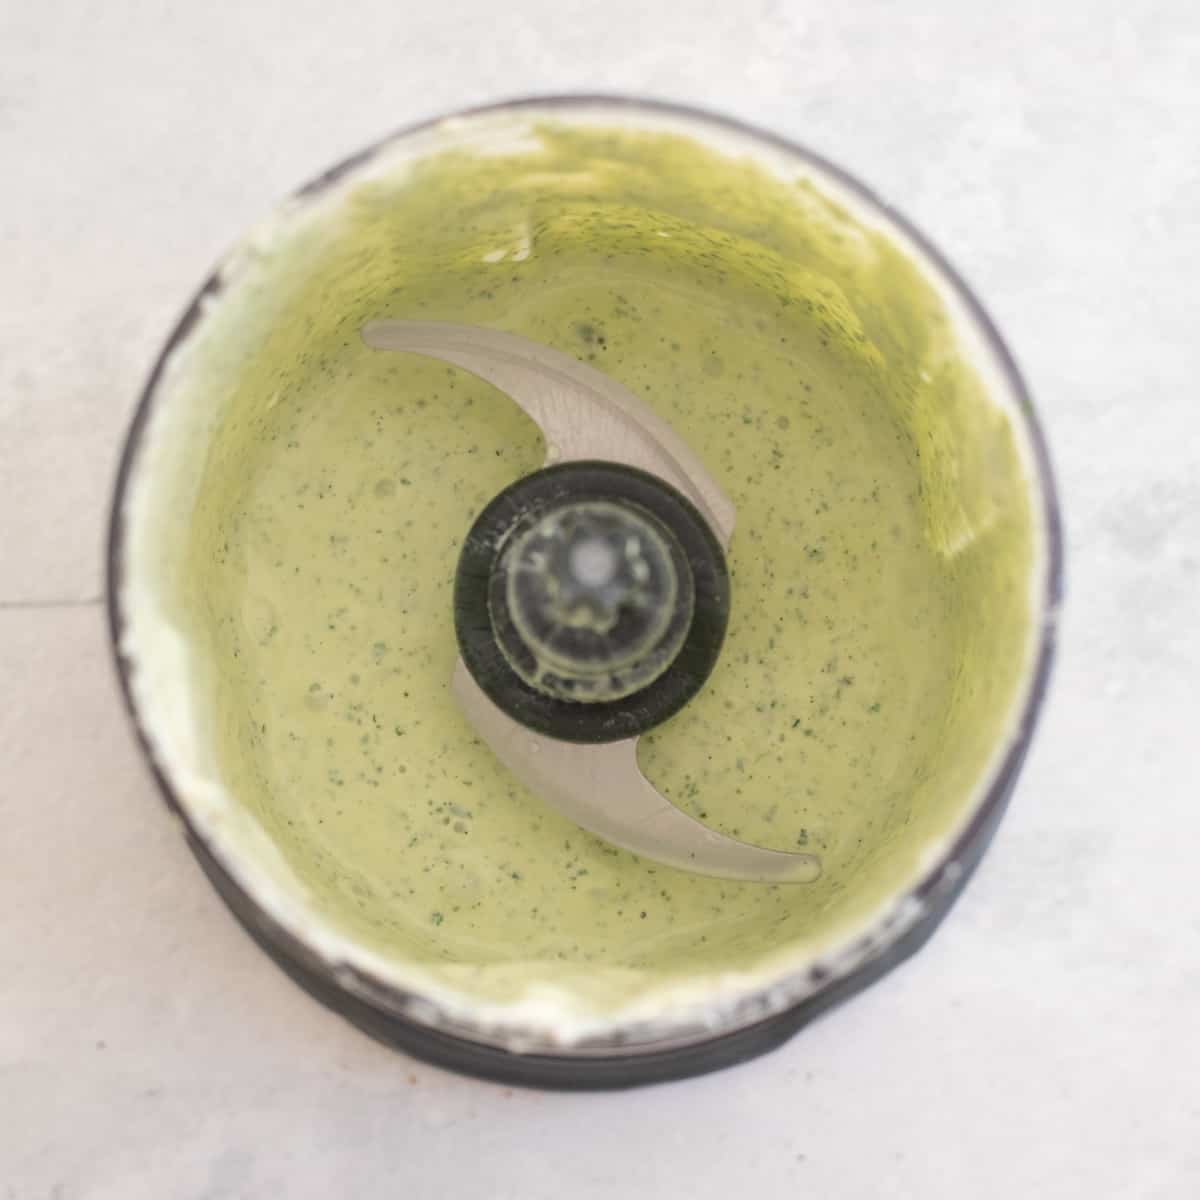 Cilantro ranch blended in a food processor. It's light green in color with dark green specks. 